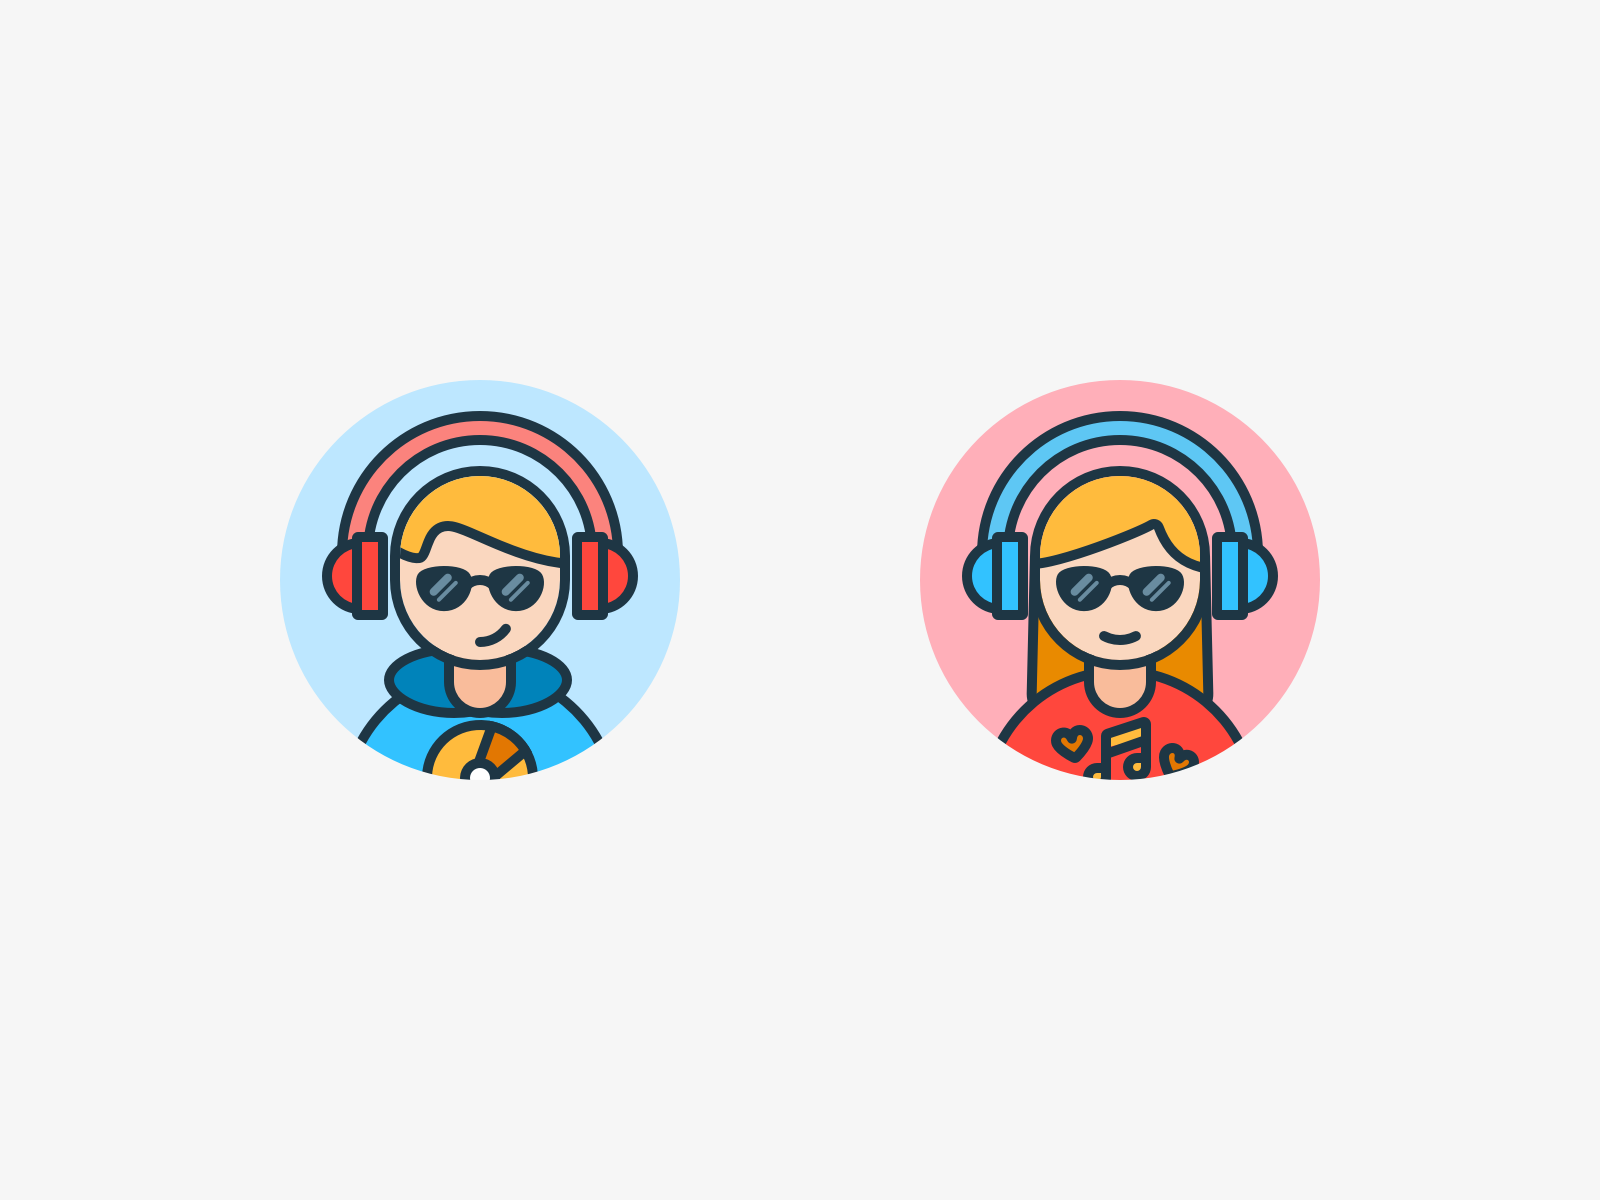 Anime Character Avatar by Xin Mu on Dribbble